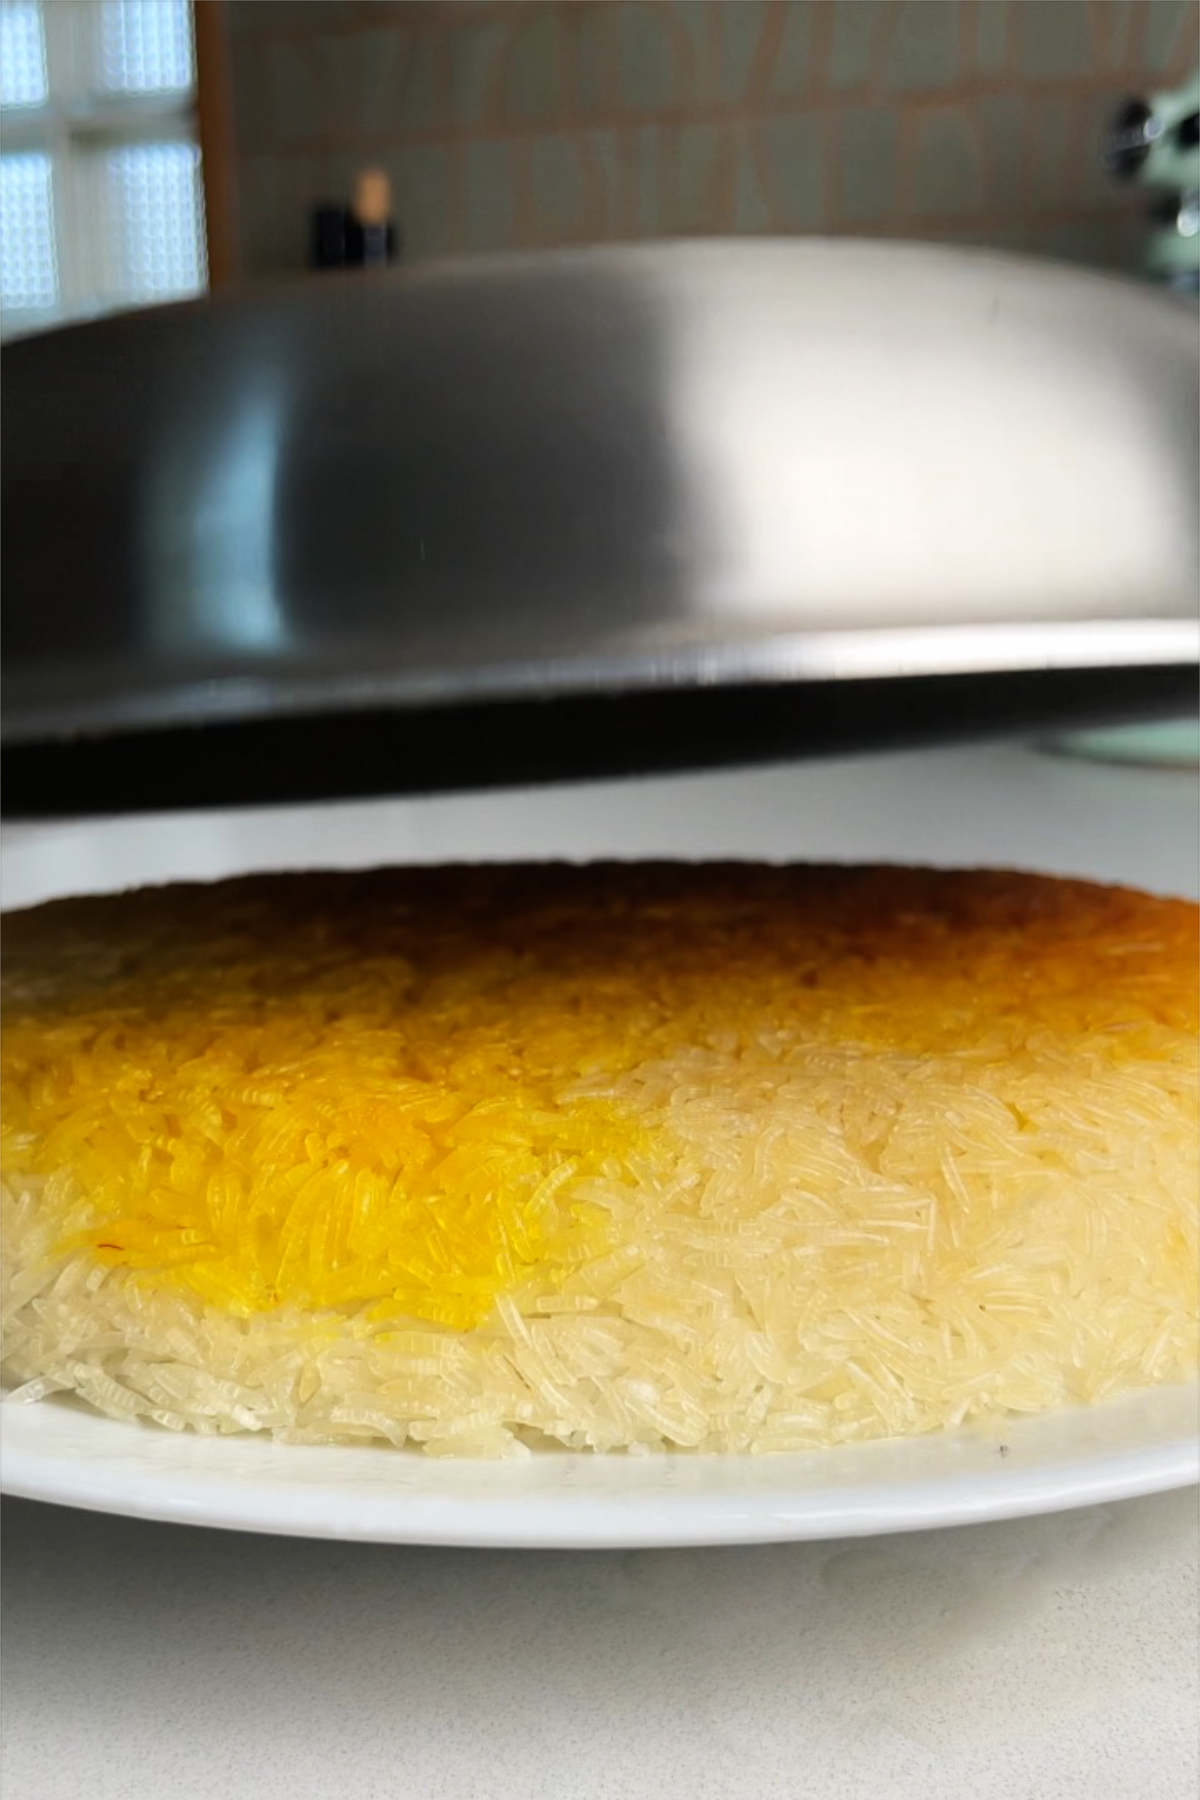 Crispy rice on a white plate with an upside down fry pan hovering over it.